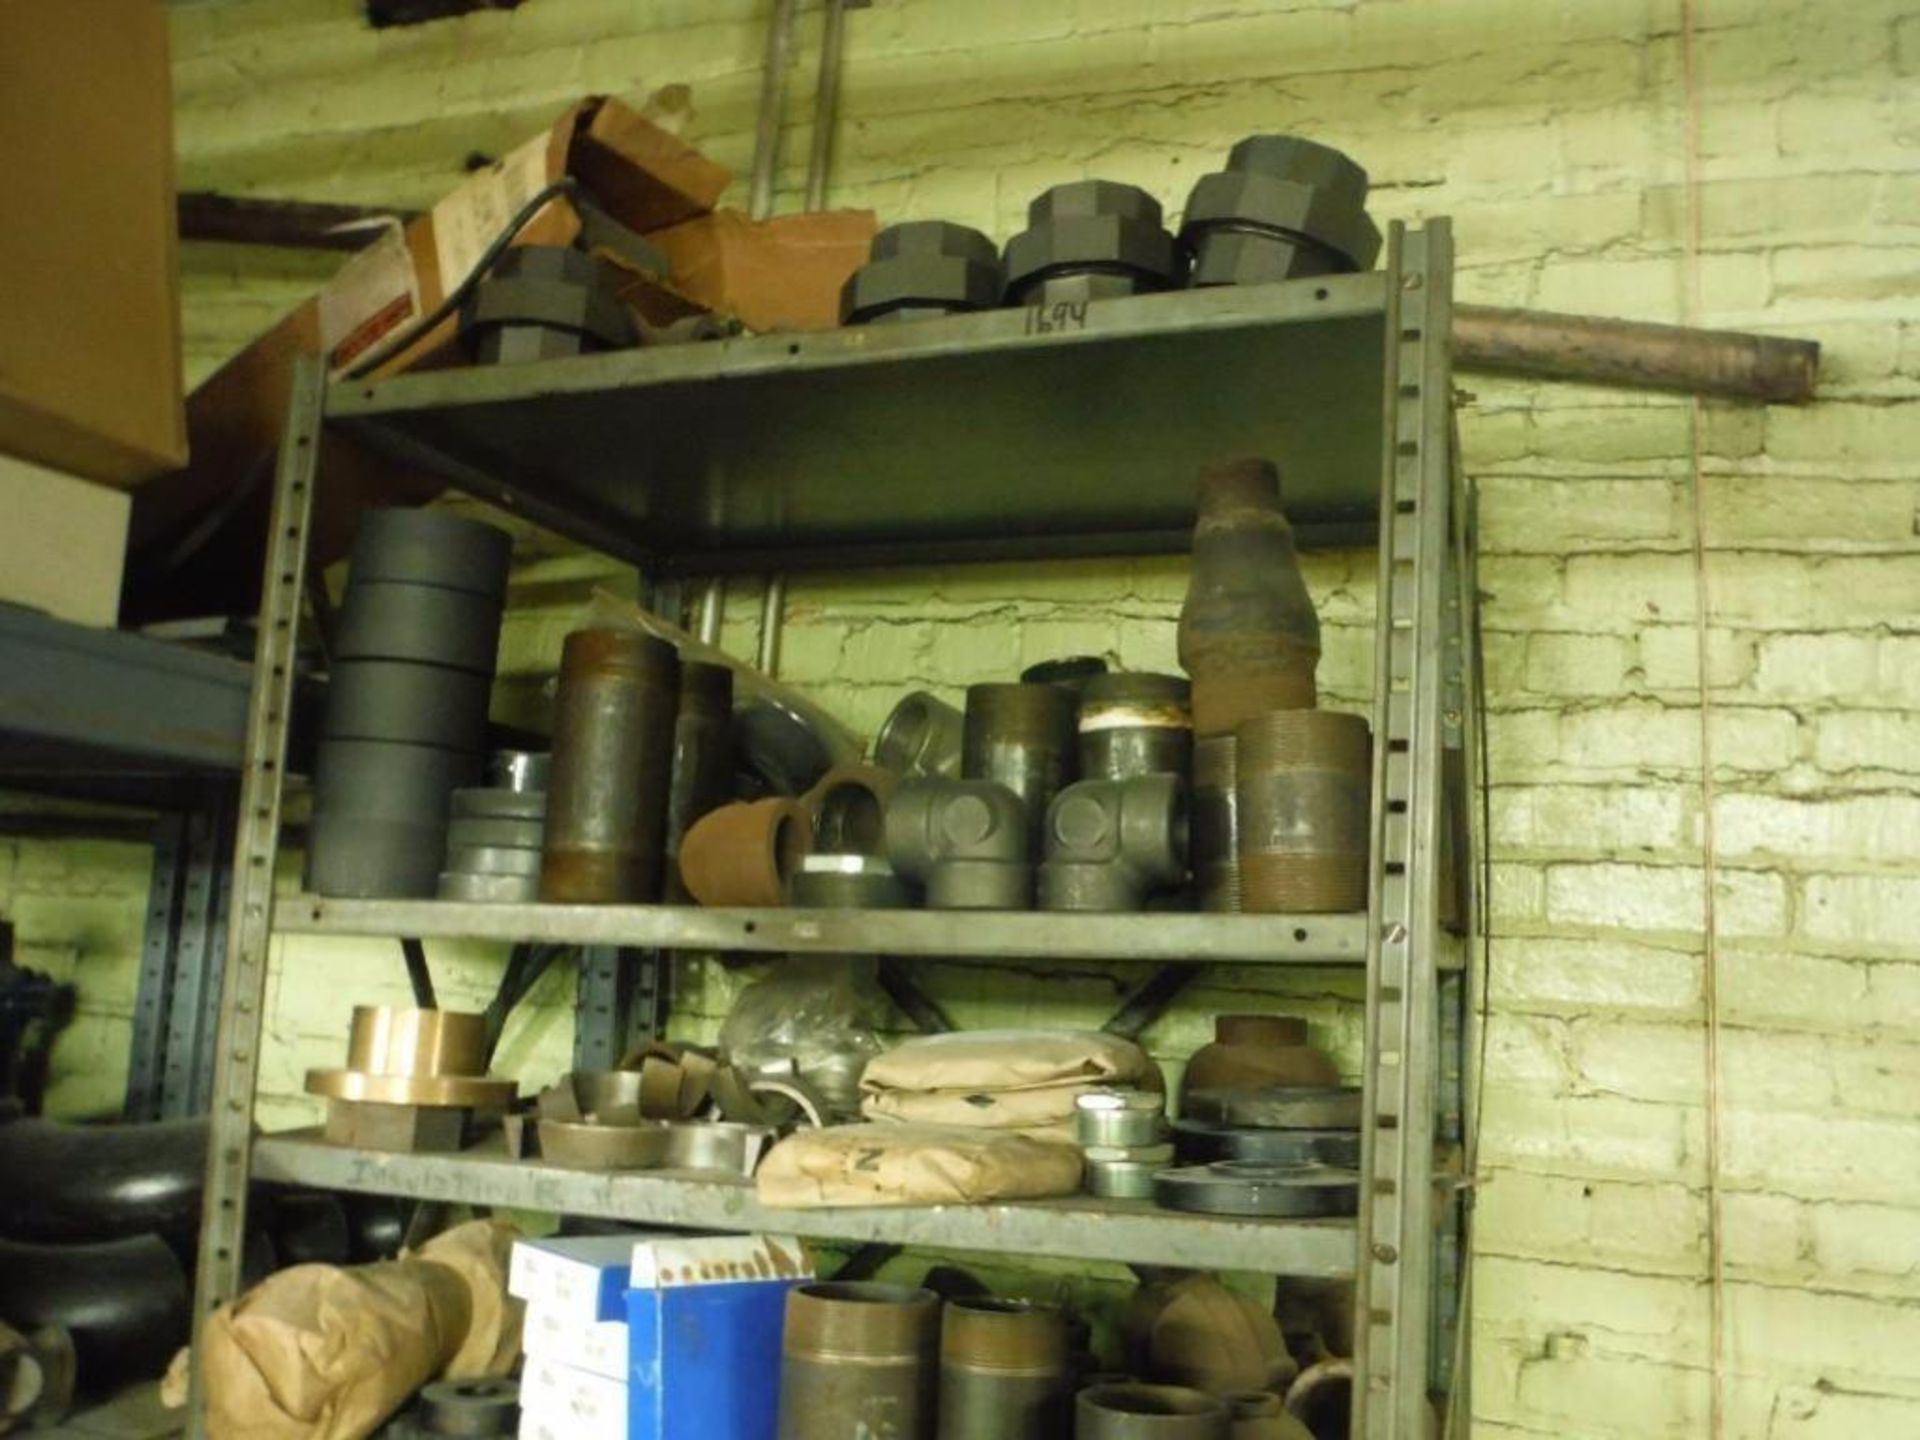 10 Shelves & content: Miscellaneous valves, fittings, brushes, and parts  Rigging Fee: $1000 - Image 6 of 14